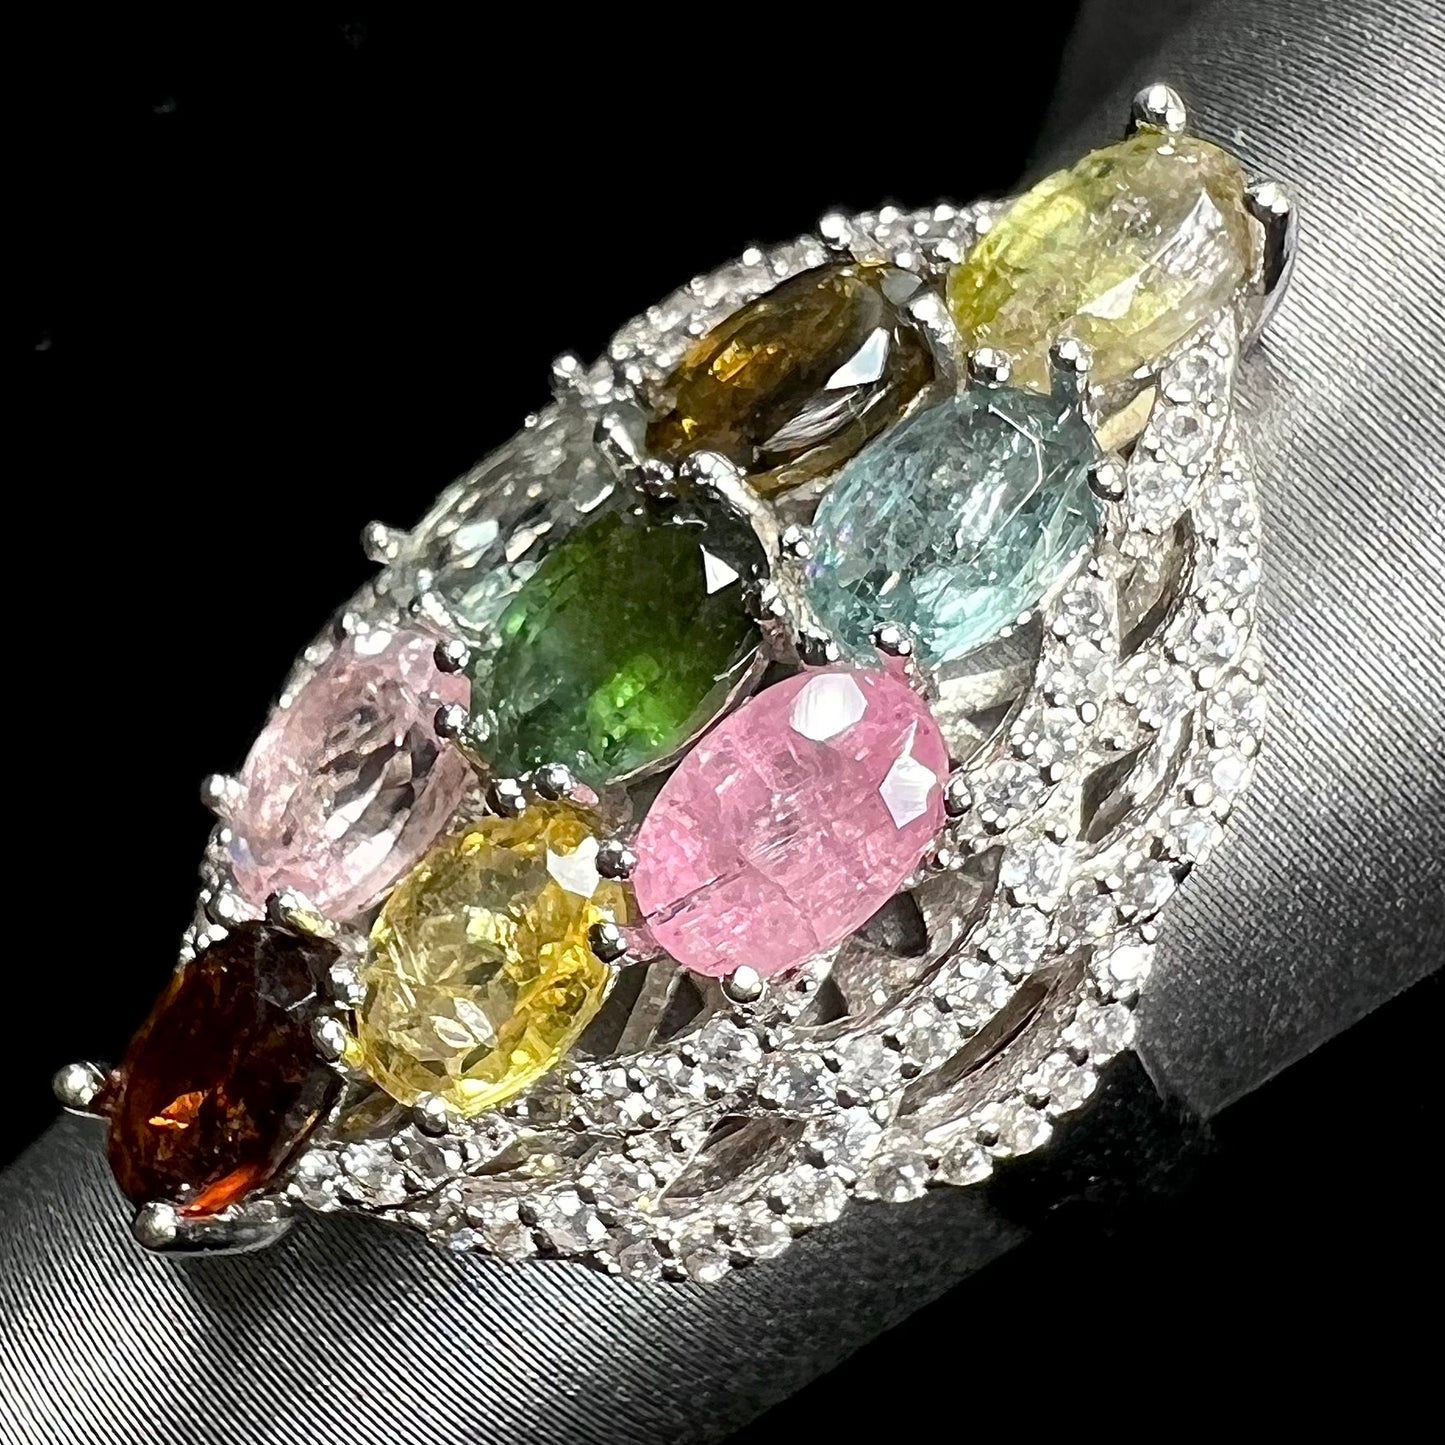 A silver gemstone cluster ring set with a rainbow of multicolored tourmaline stones.